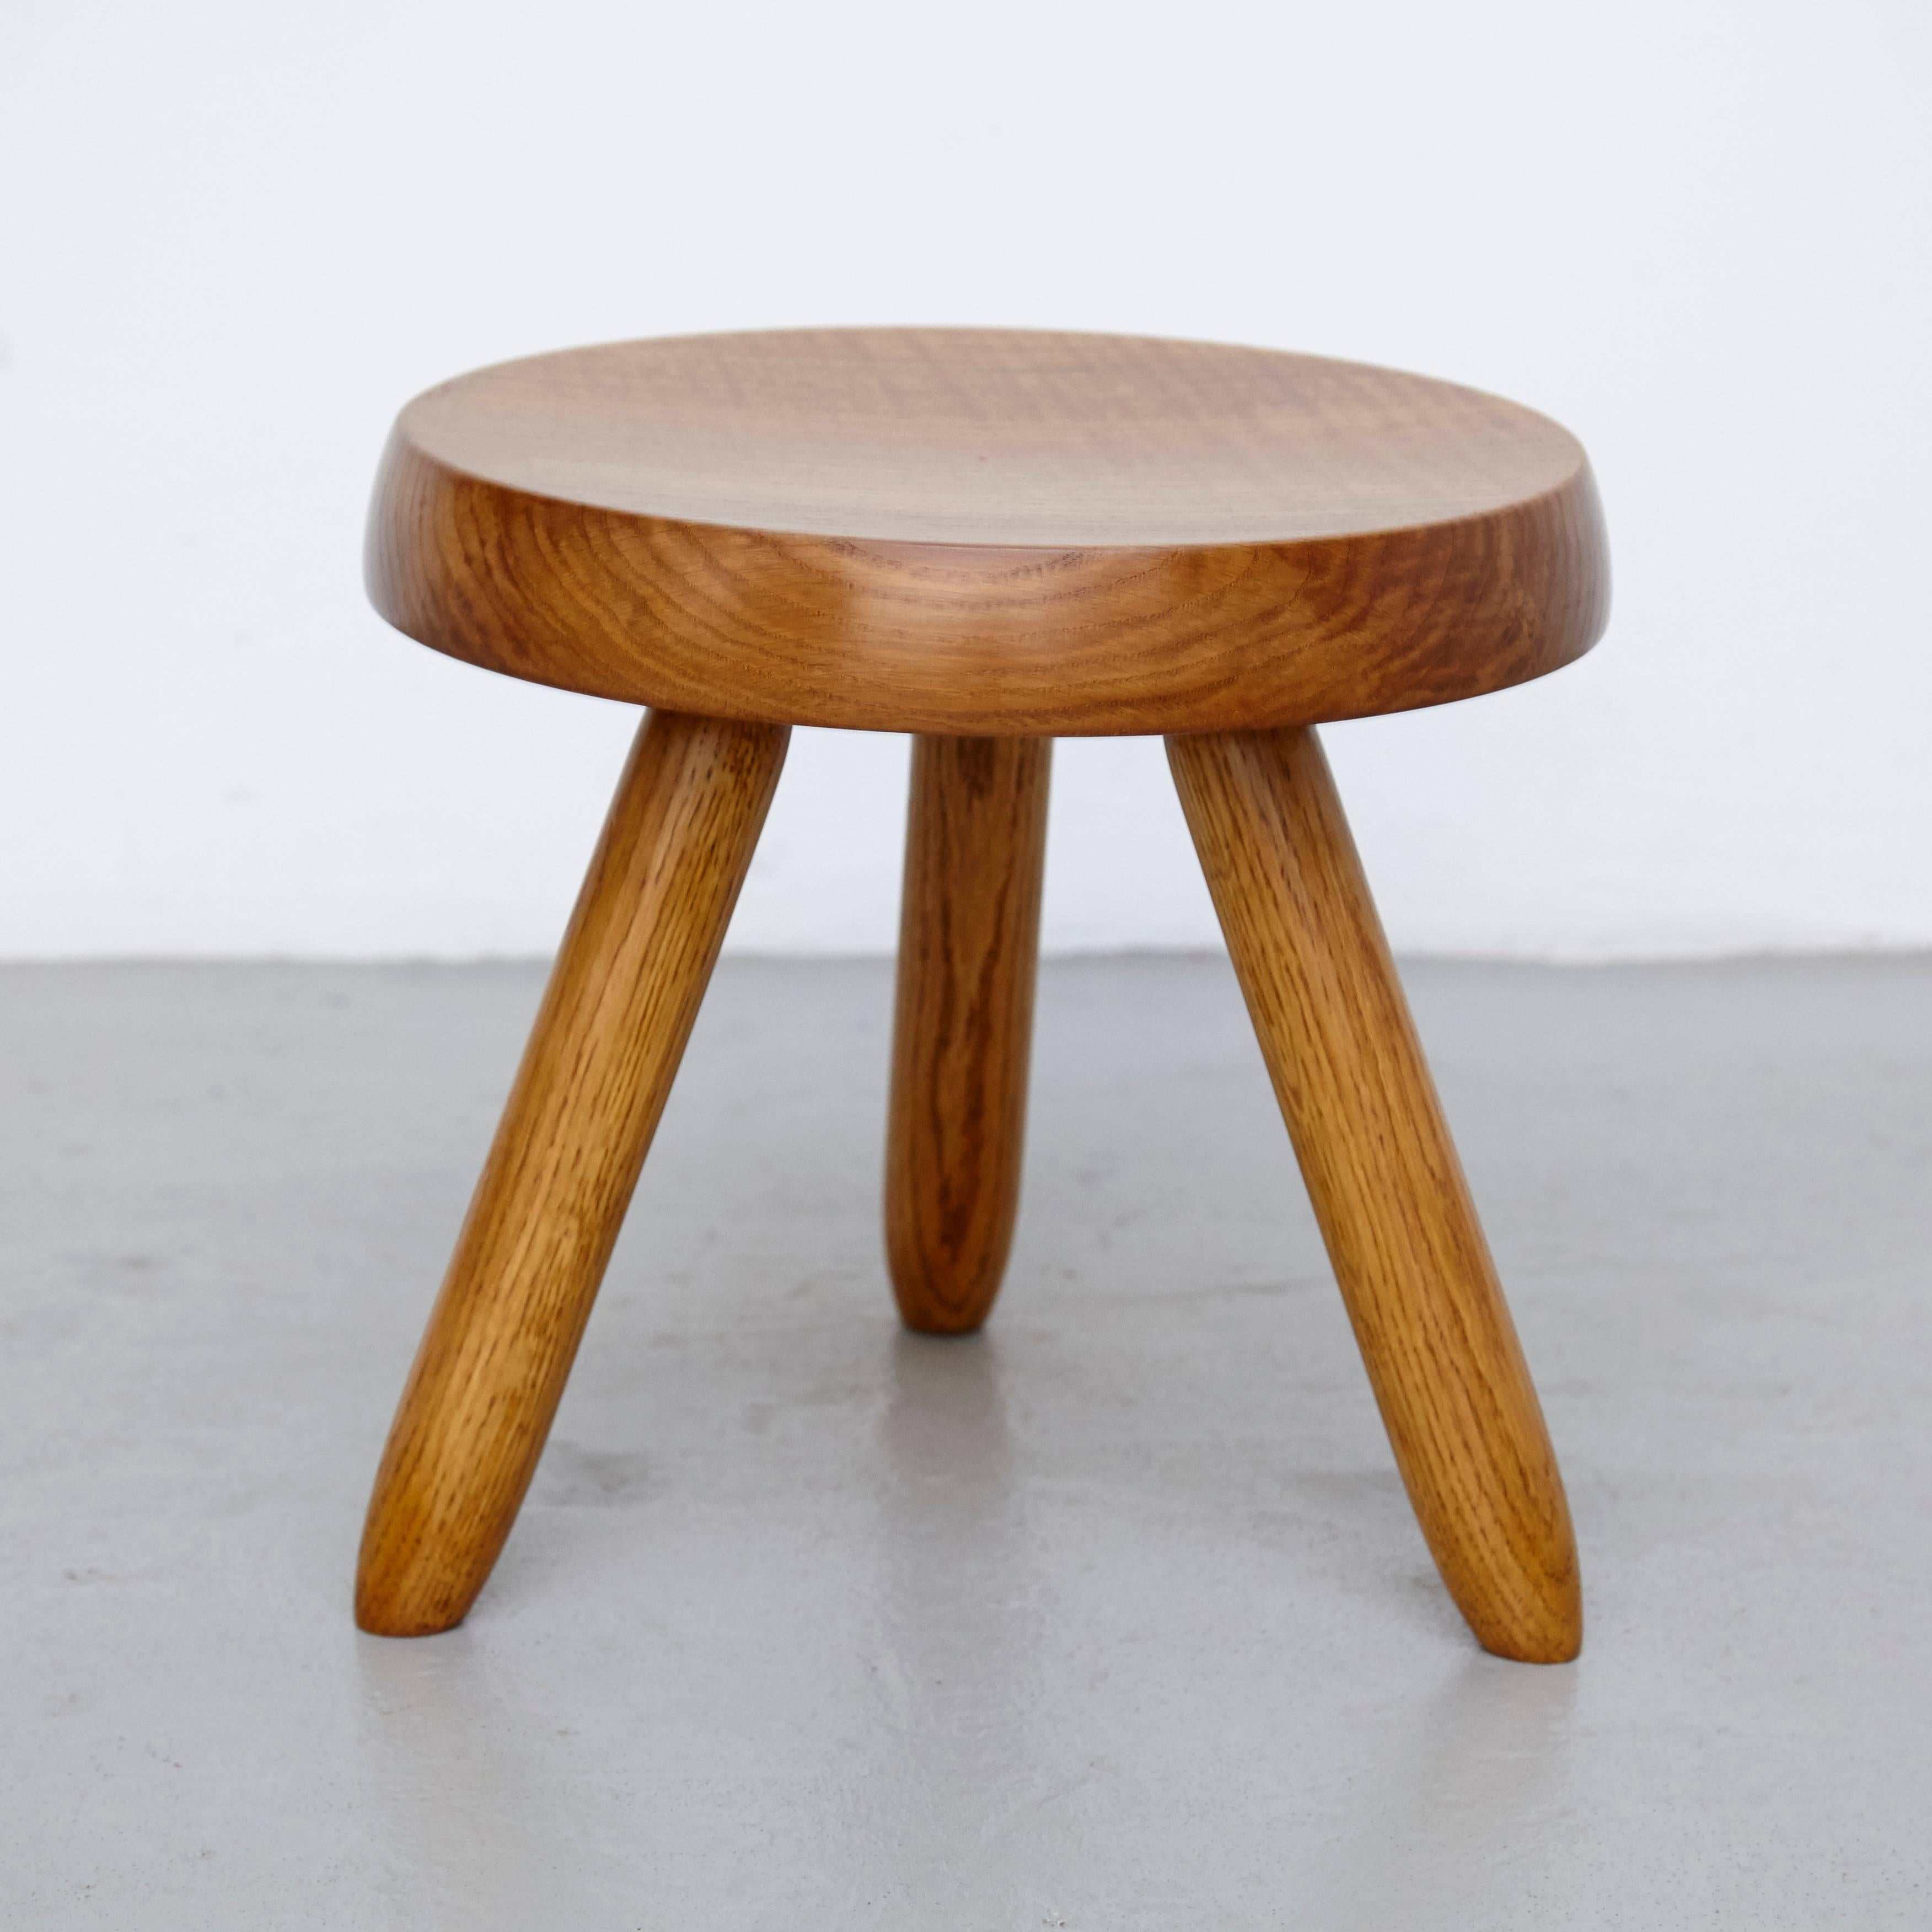 Stool designed in the style of Charlotte Perriand.
Made by unknown manufacturer.

In good original condition, preserving a beautiful patina, with minor wear consistent with age and use. 

Charlotte Perriand (1903-1999) She was born in Paris in